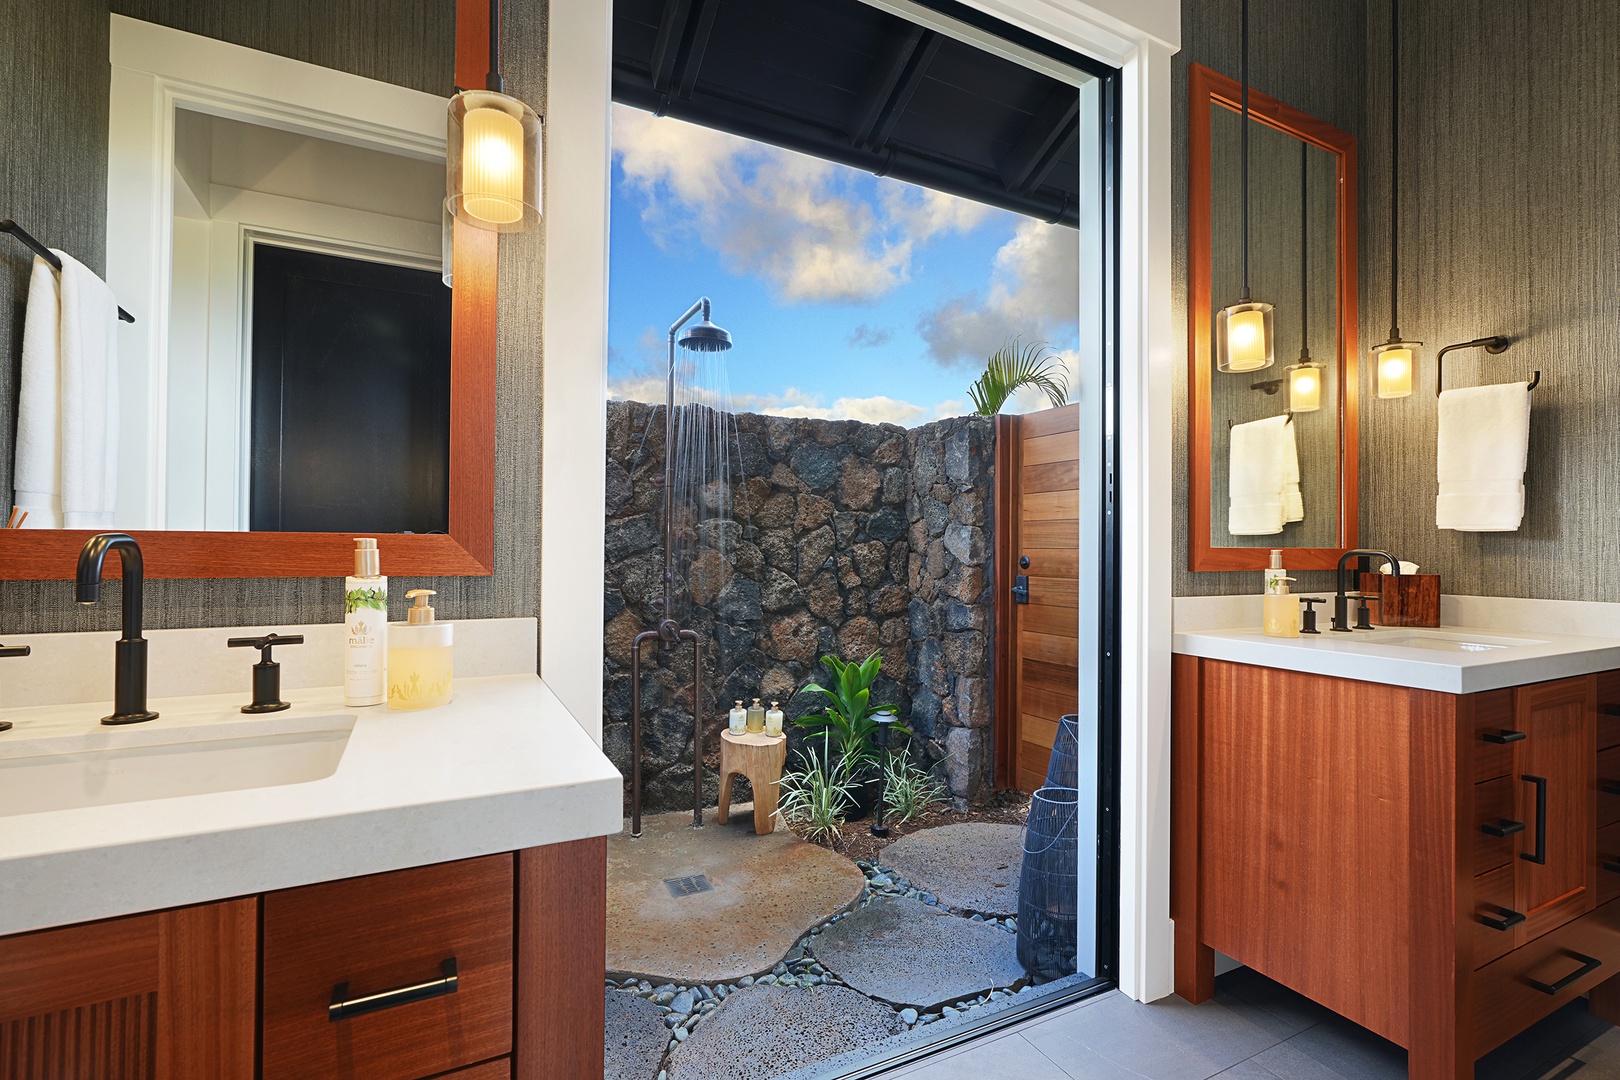 Koloa Vacation Rentals, Hale Pakika at Kukui'ula - The guest bathroom features an amazing outdoor shower.